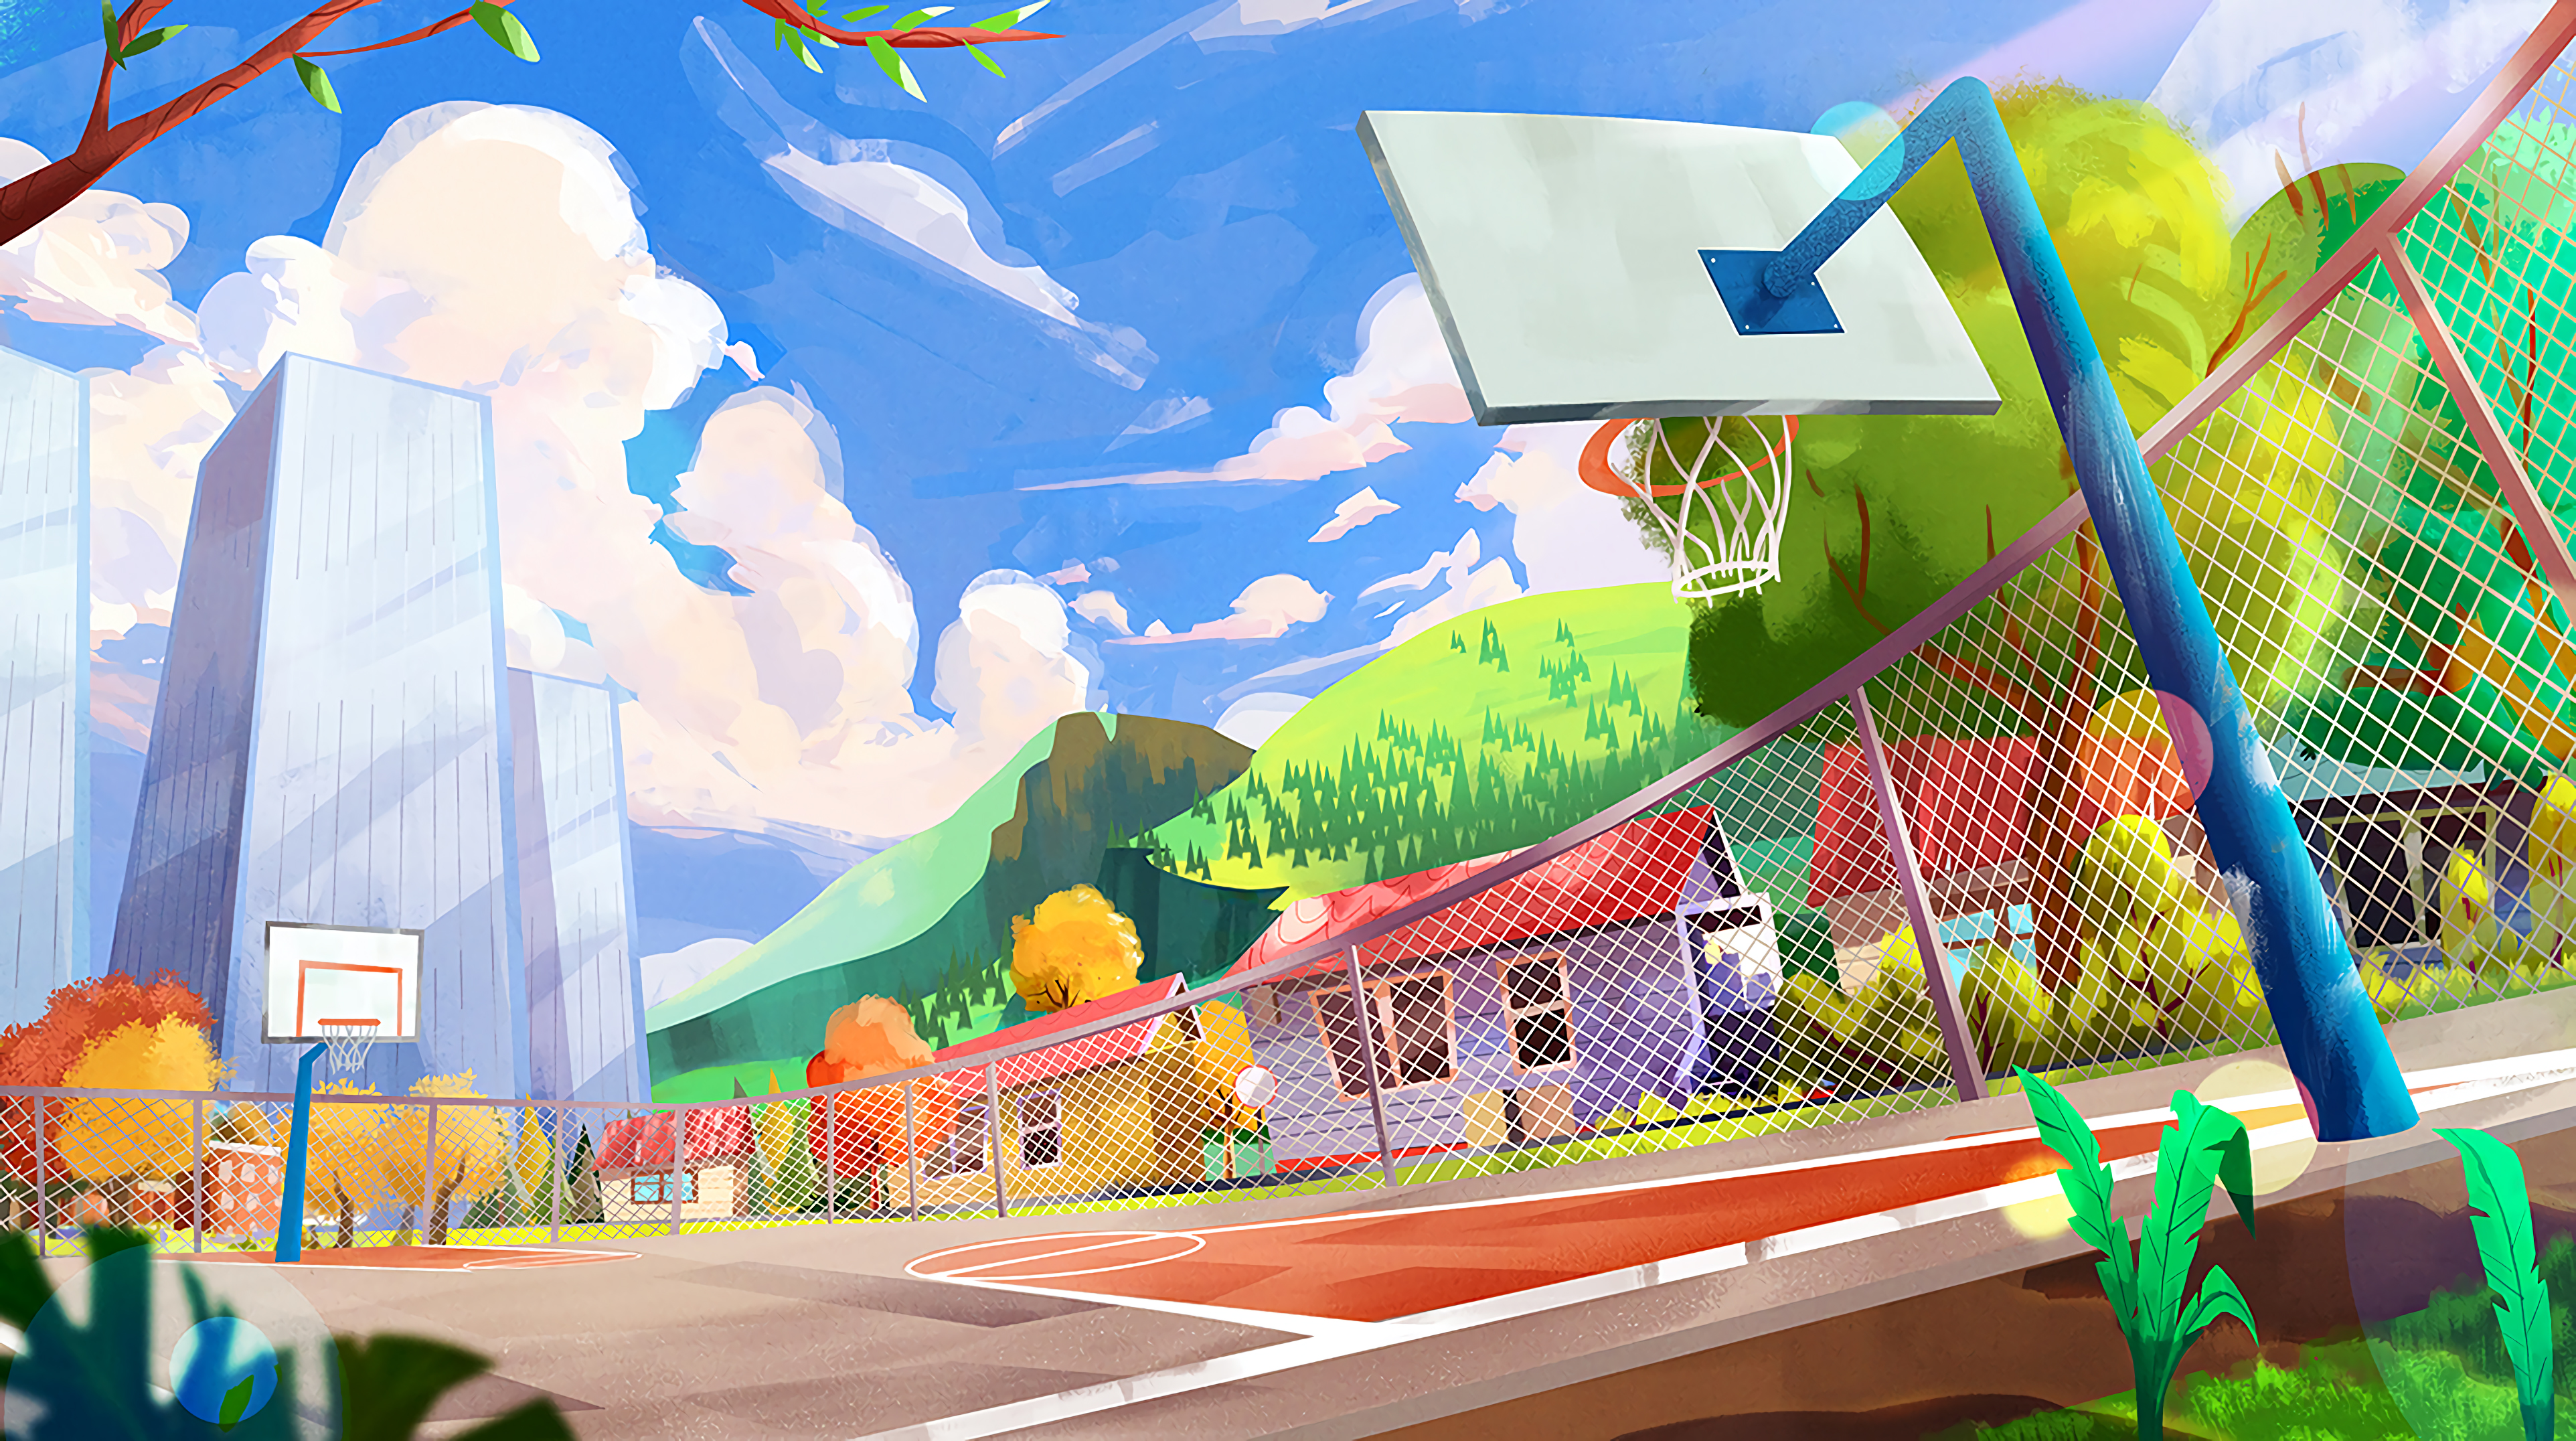 Download PC Wallpaper basketball hoop, playground, city, colorful, art, colourful, basketball ring, sports ground